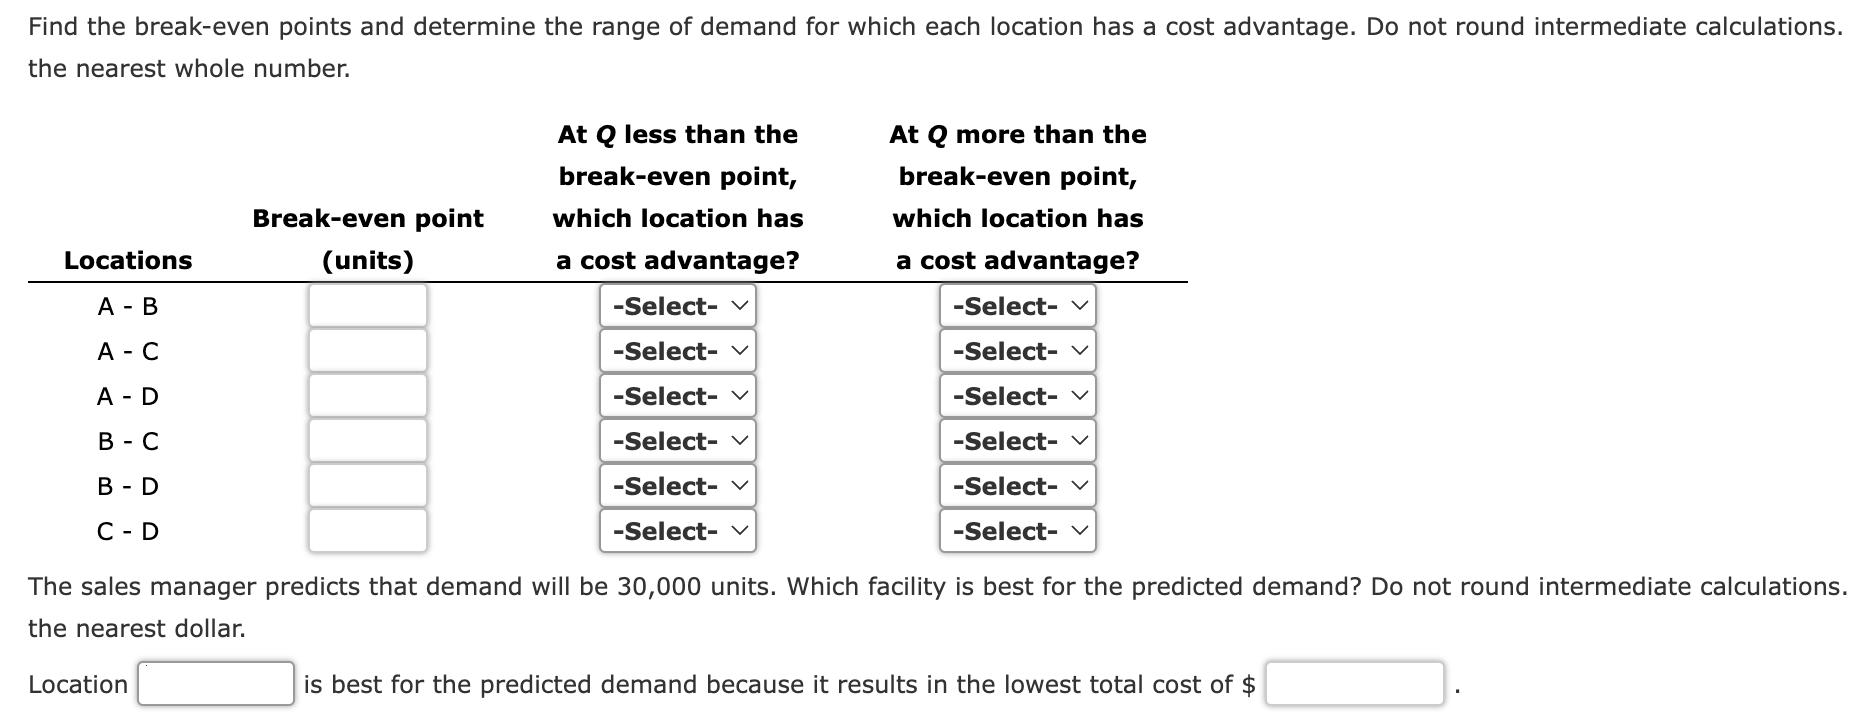 Find the break-even points and determine the range of demand for which each location has a cost advantage. Do